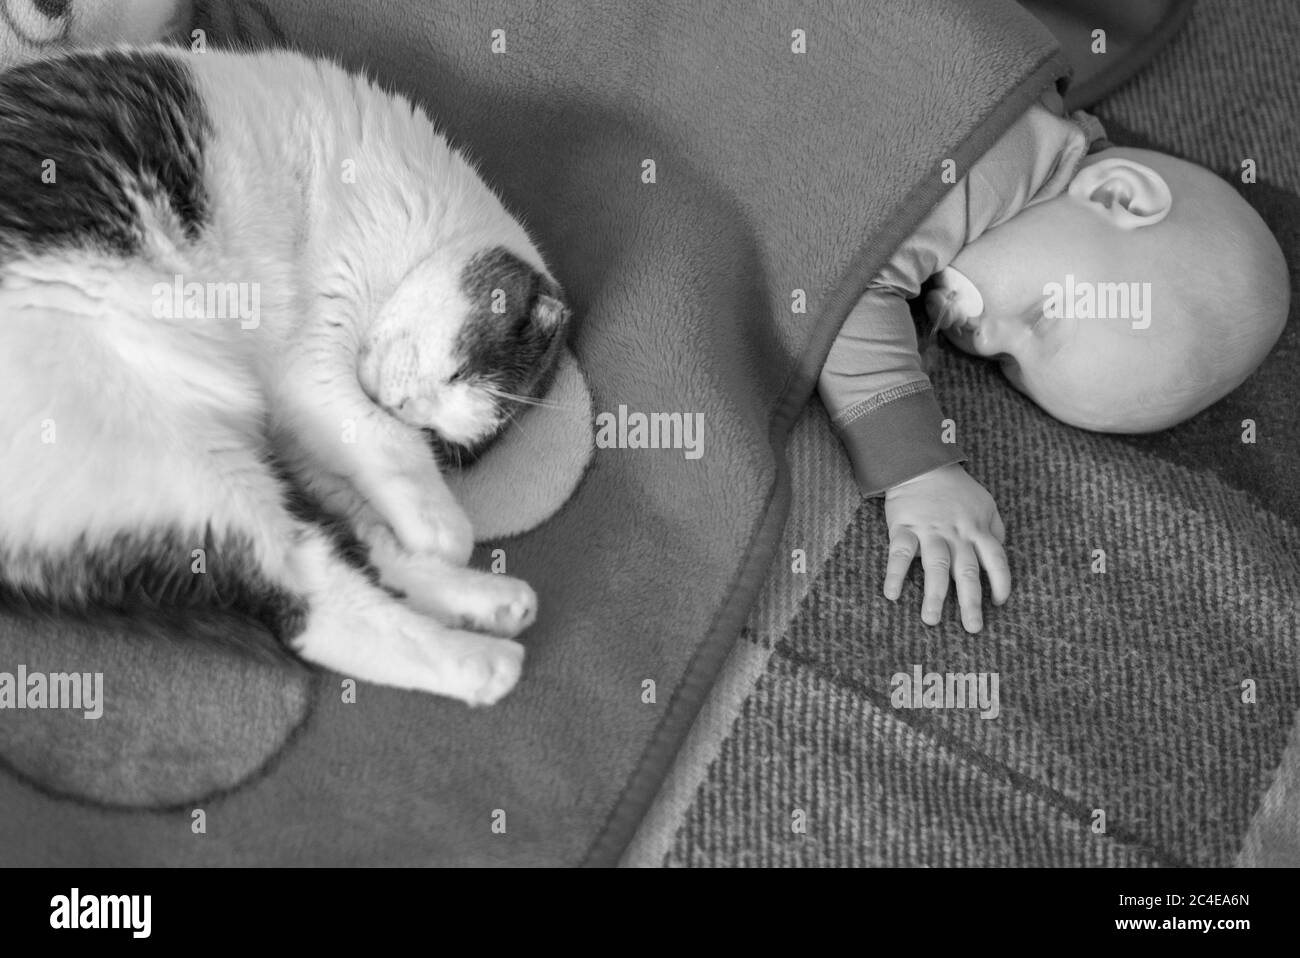 Little baby and cat sleep together in the bed, black and white photo Stock Photo